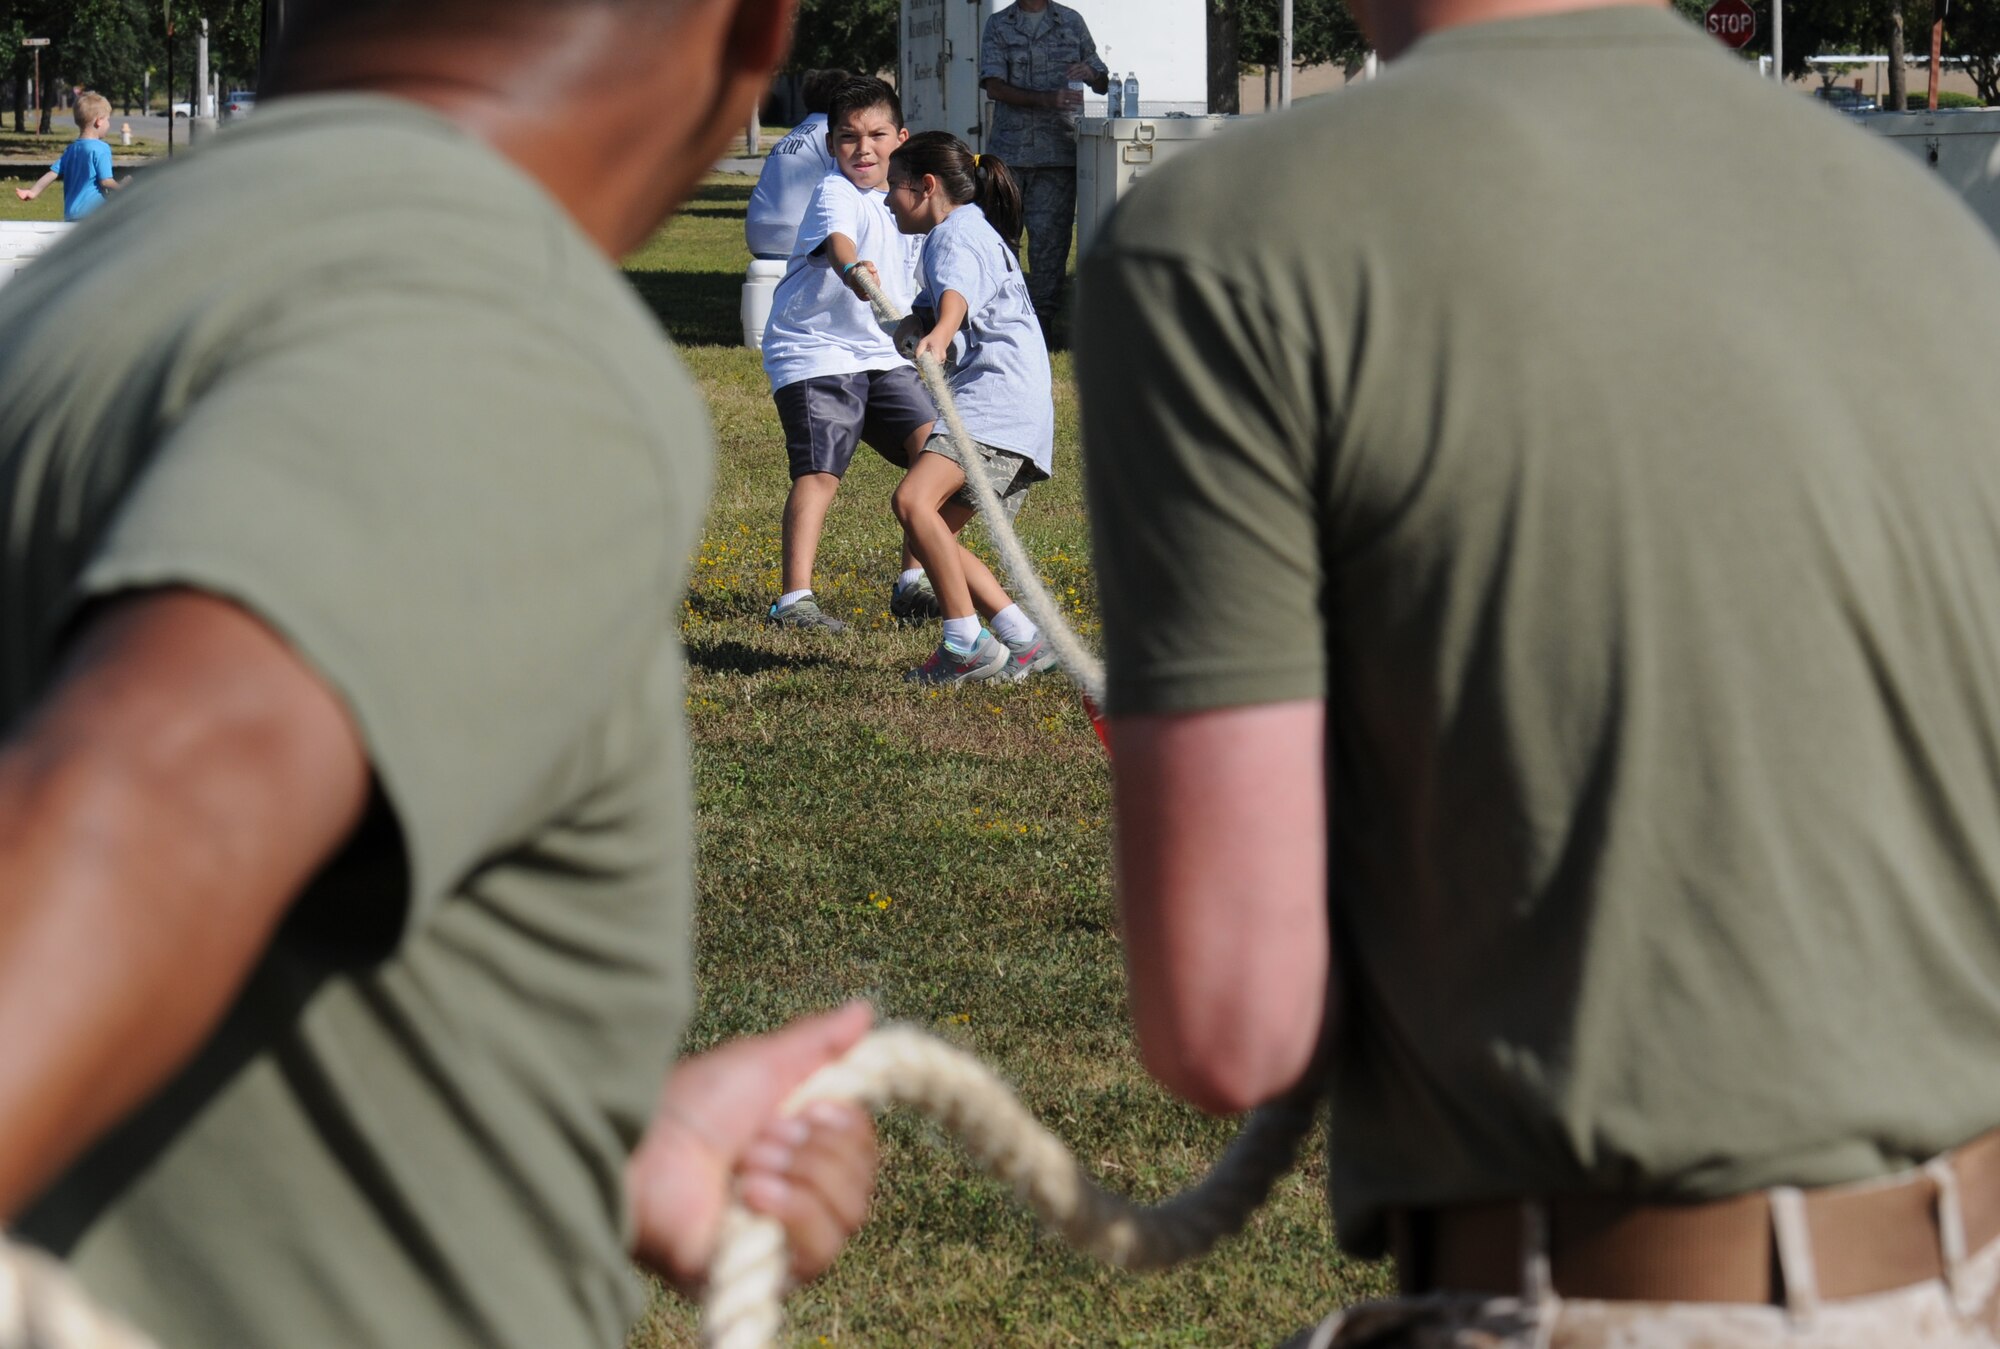 Andrew and Bella Stevenson, children of Tech. Sgt. Soledad Stevenson, 81st Force Support Squadron readiness NCO in charge, participate in tug-of-war with Keesler Marine Detachment students , during Operation Hero Oct. 15, 2016, on Keesler Air Force Base, Miss. The event was designed to help children better understand what their parents do when they deploy. (U.S. Air Force photo by Kemberly Groue/Released)